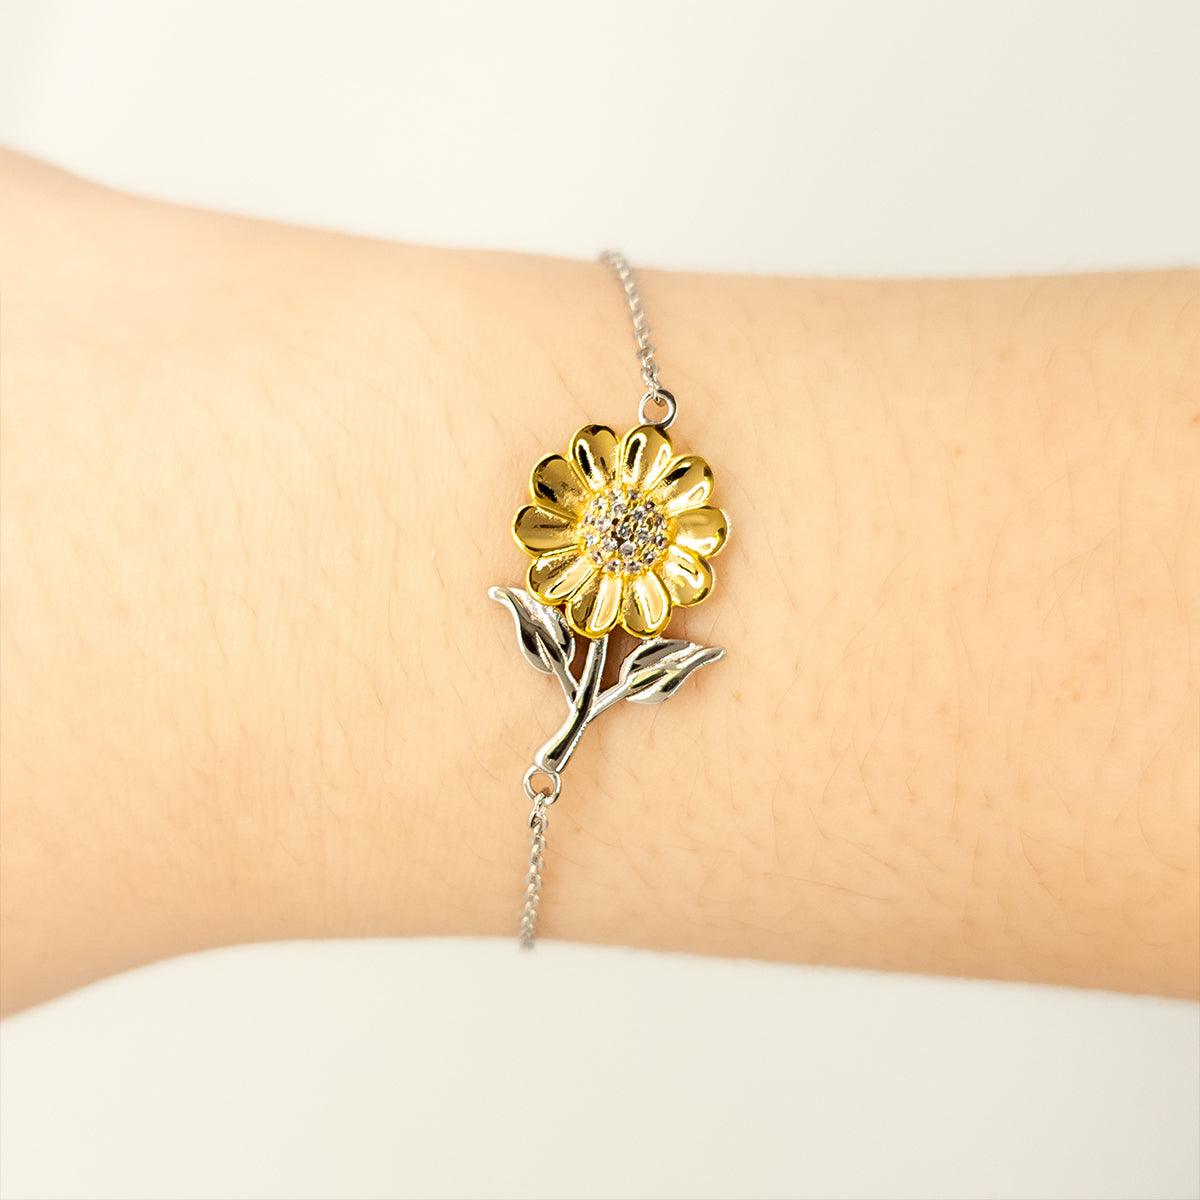 Godmother Gifts, To My Godmother Remember, you will never lose. You will either WIN or LEARN, Keepsake Sunflower Bracelet For Godmother Card, Birthday Christmas Gifts Ideas For Godmother X-mas Gifts